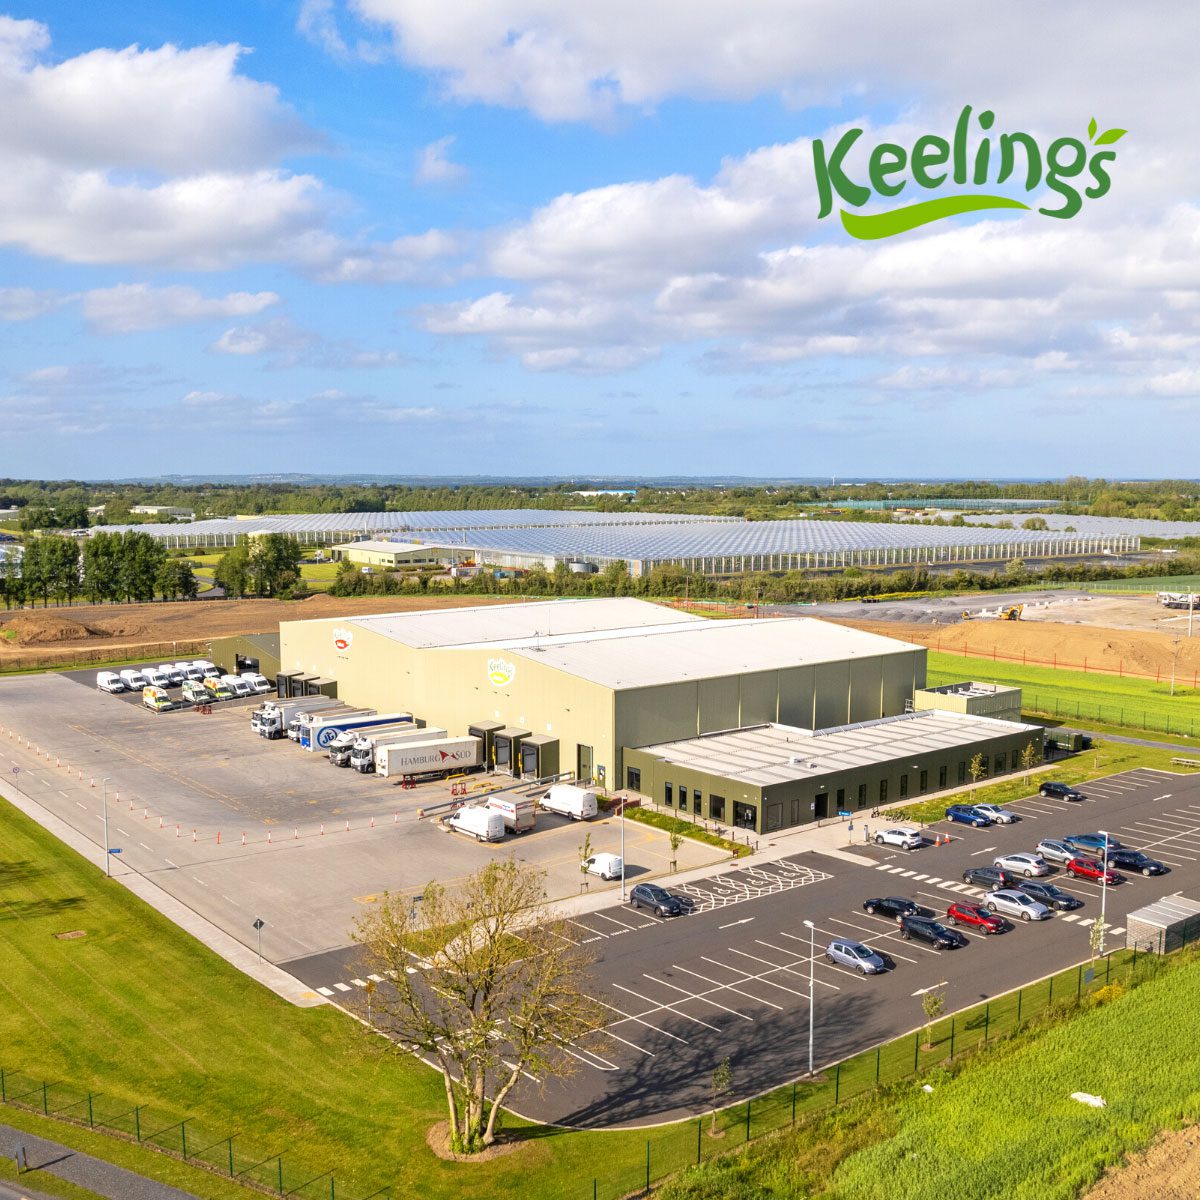 Keelings Select Awarded Gold TruckSafe Standard from the Freight Transport Association of Ireland